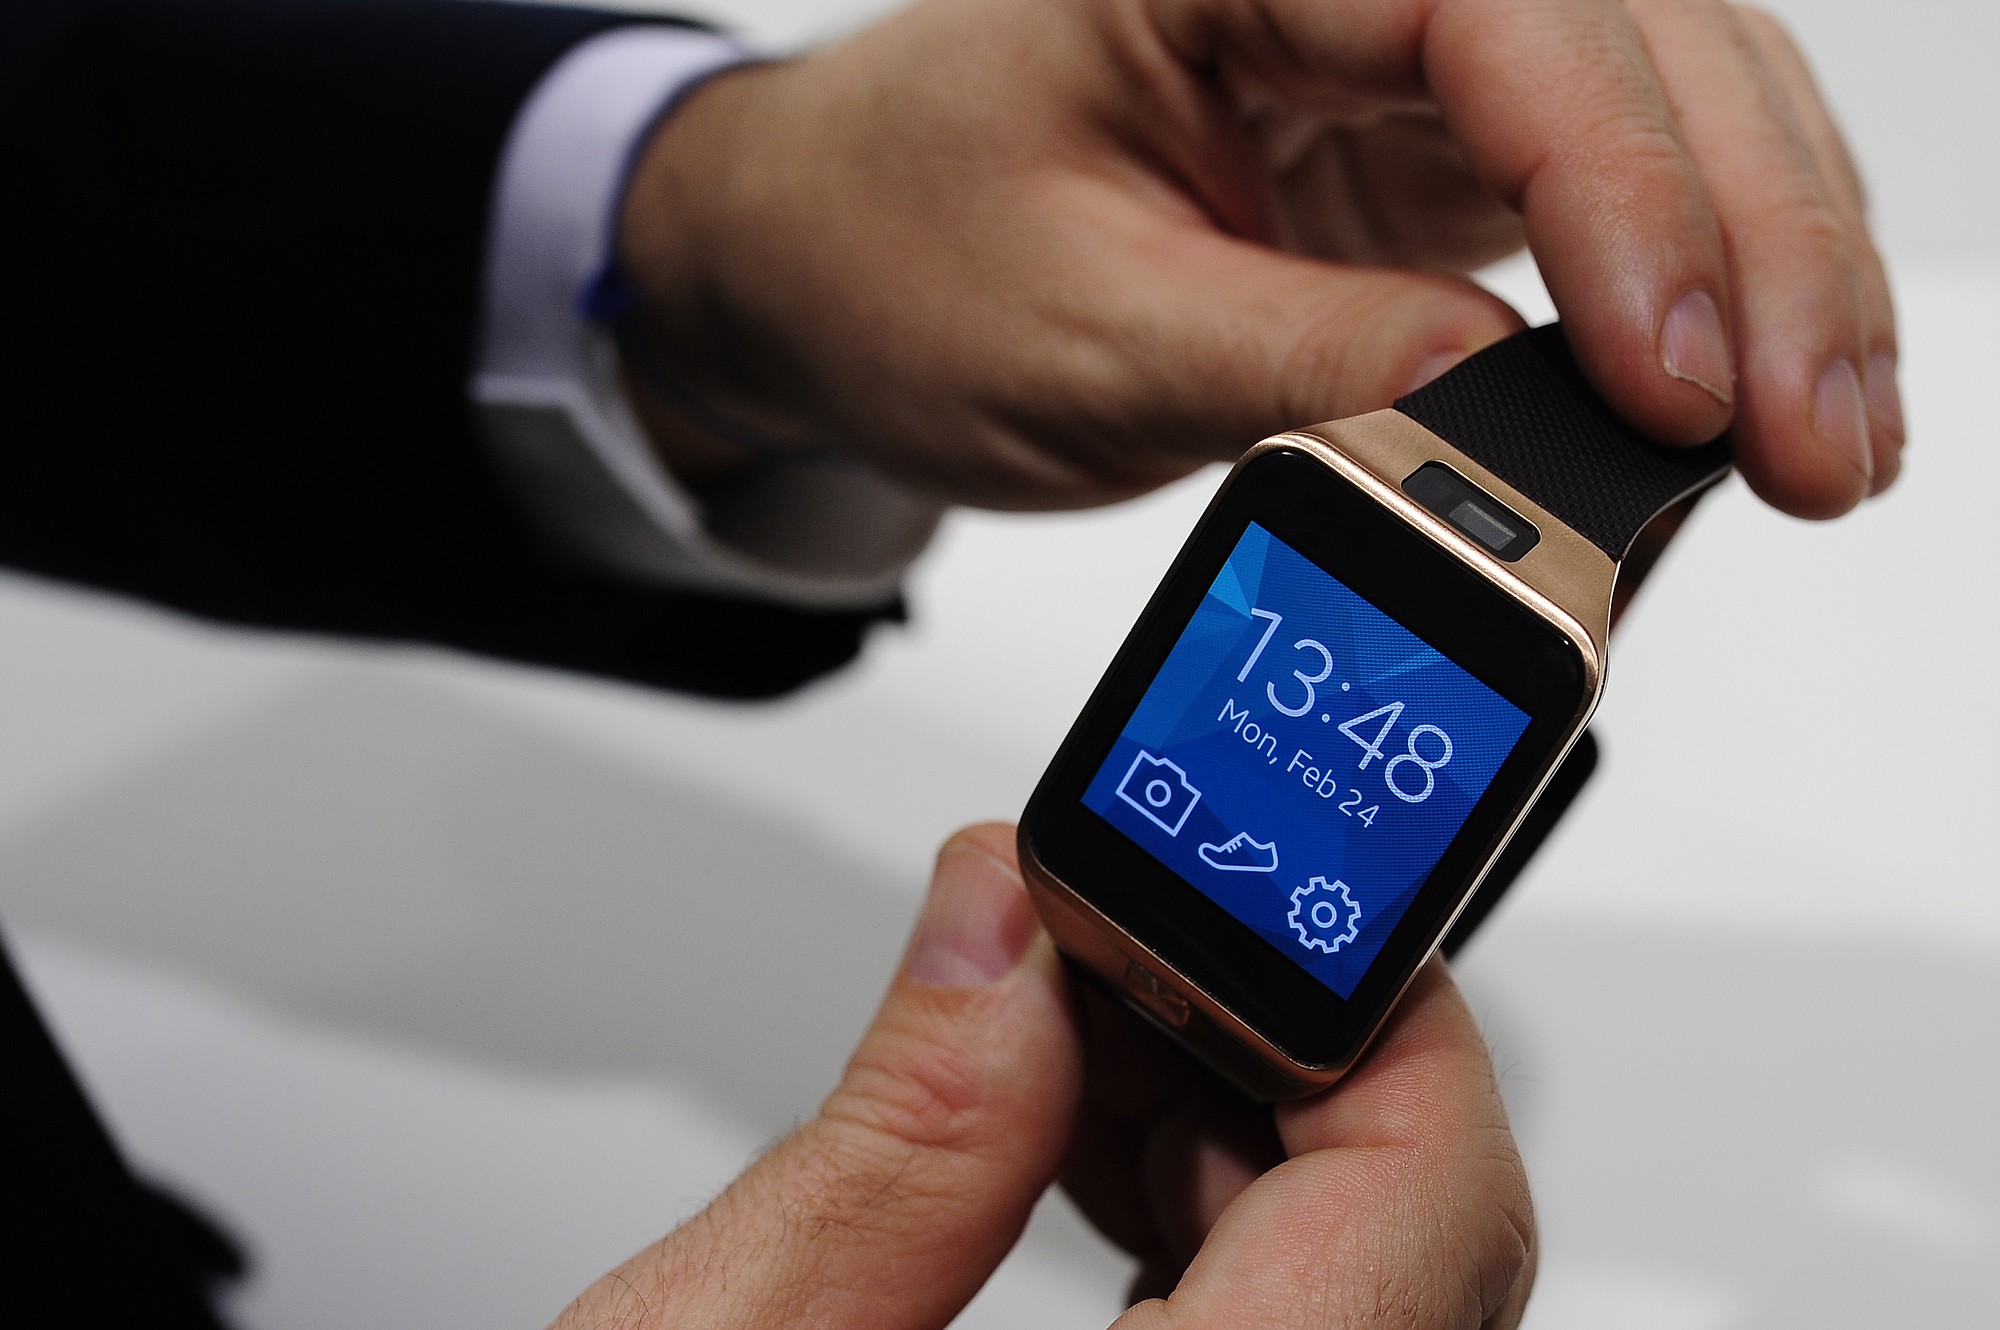 The Samsung Gear 2 smartwatch is displayed at the Mobile World Congress in Spain. The Gear 2 line doesn't use Android Wear, but a fledging system called Tizen. Samsung says that helps extend battery life to two or three days, instead of the single day on the original, Android-based Galaxy Gear.